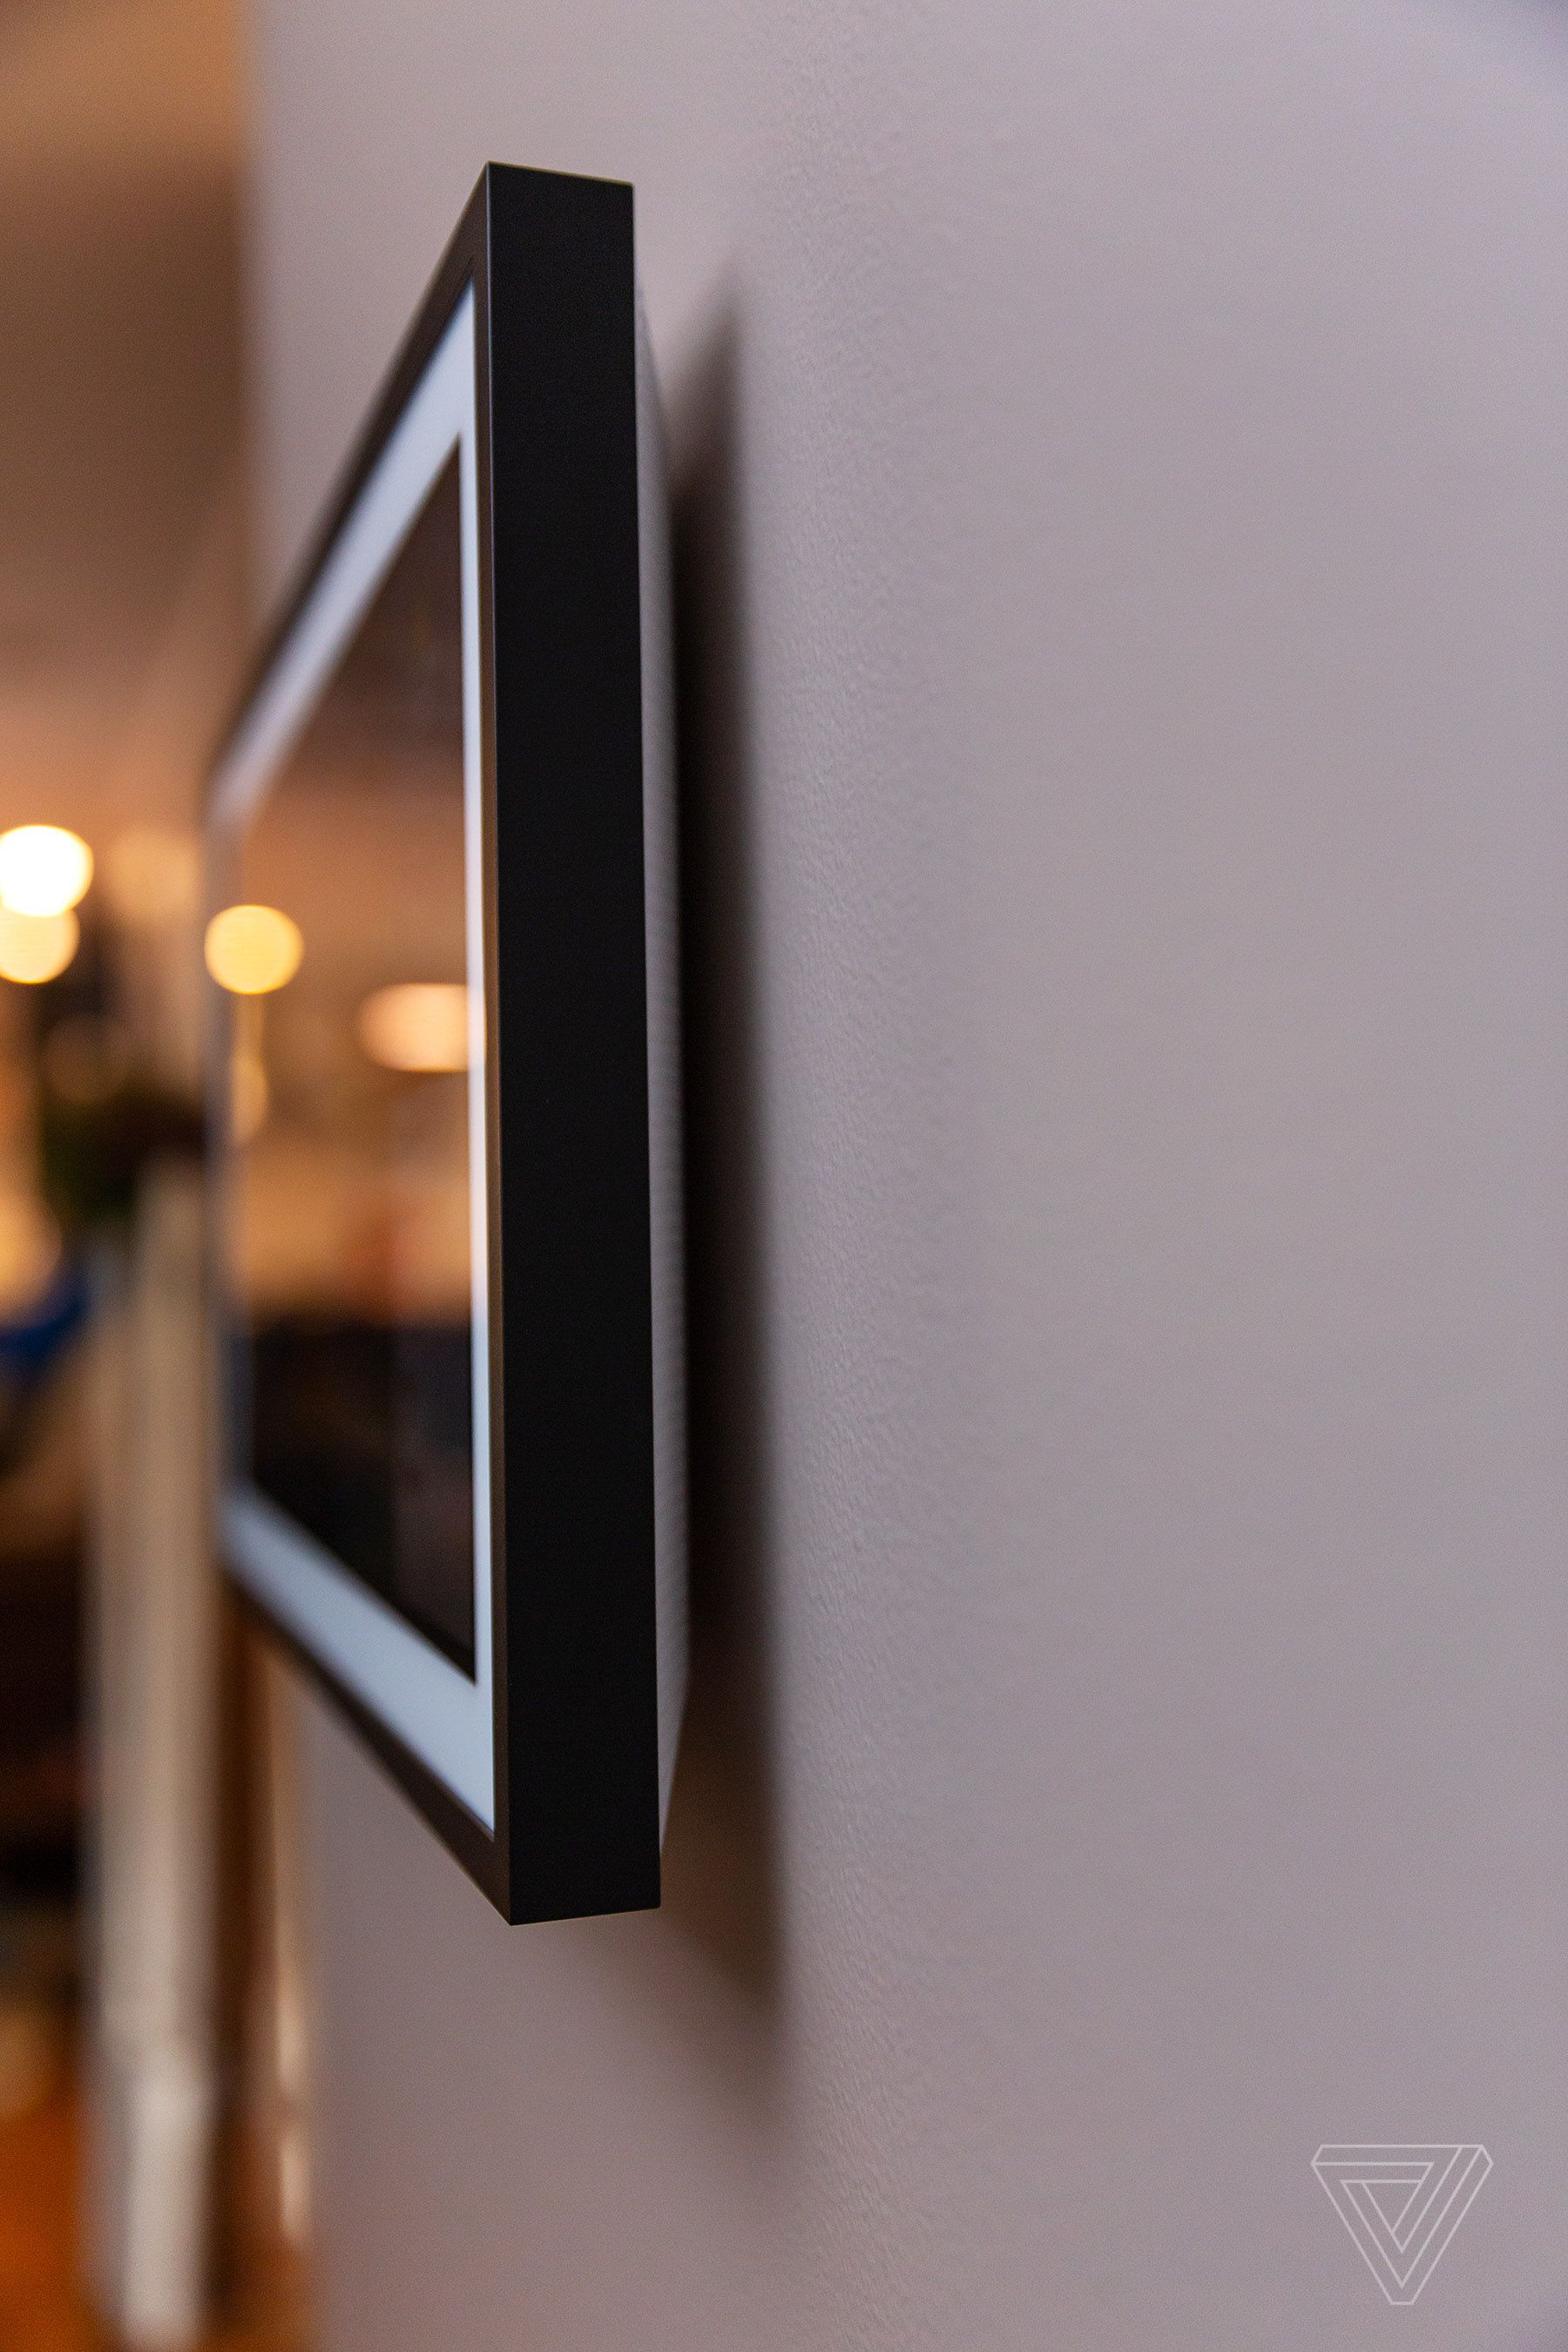 A slimline design allows room for speakers without a super bulky form factor when mounted on the wall.